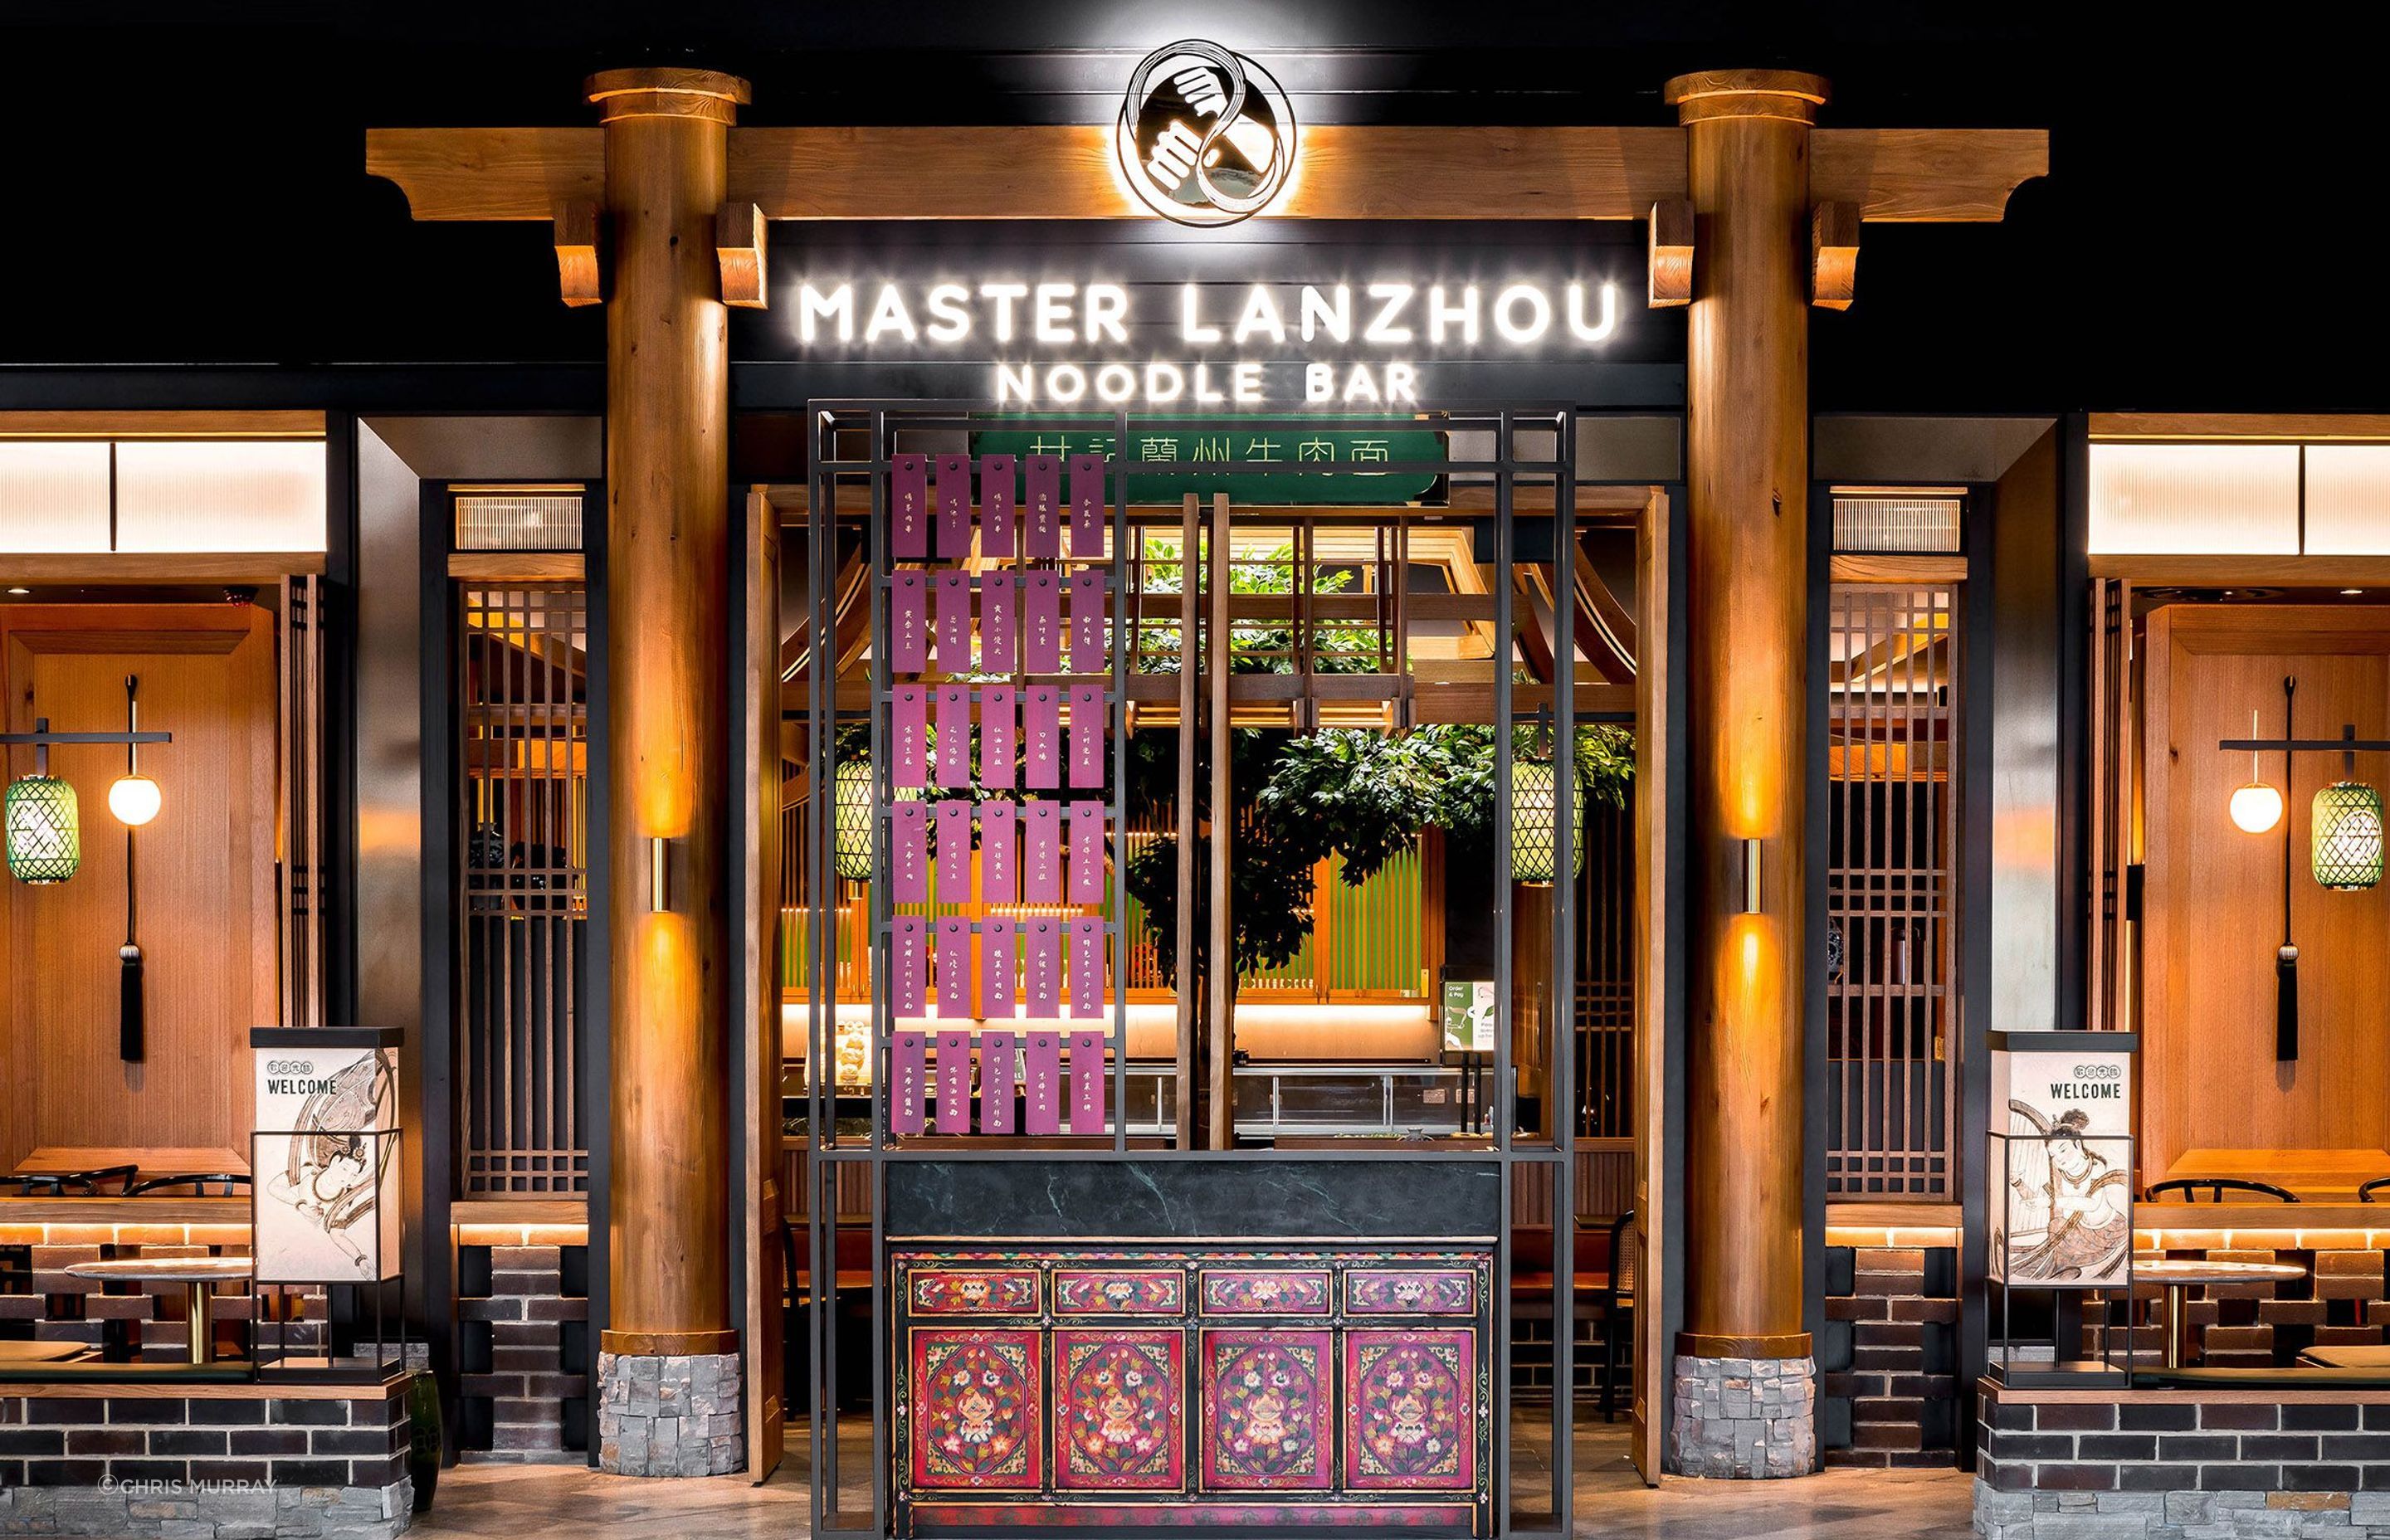 Master Lanzhou Noodle Bar was inspired by a traditional courtyard house.